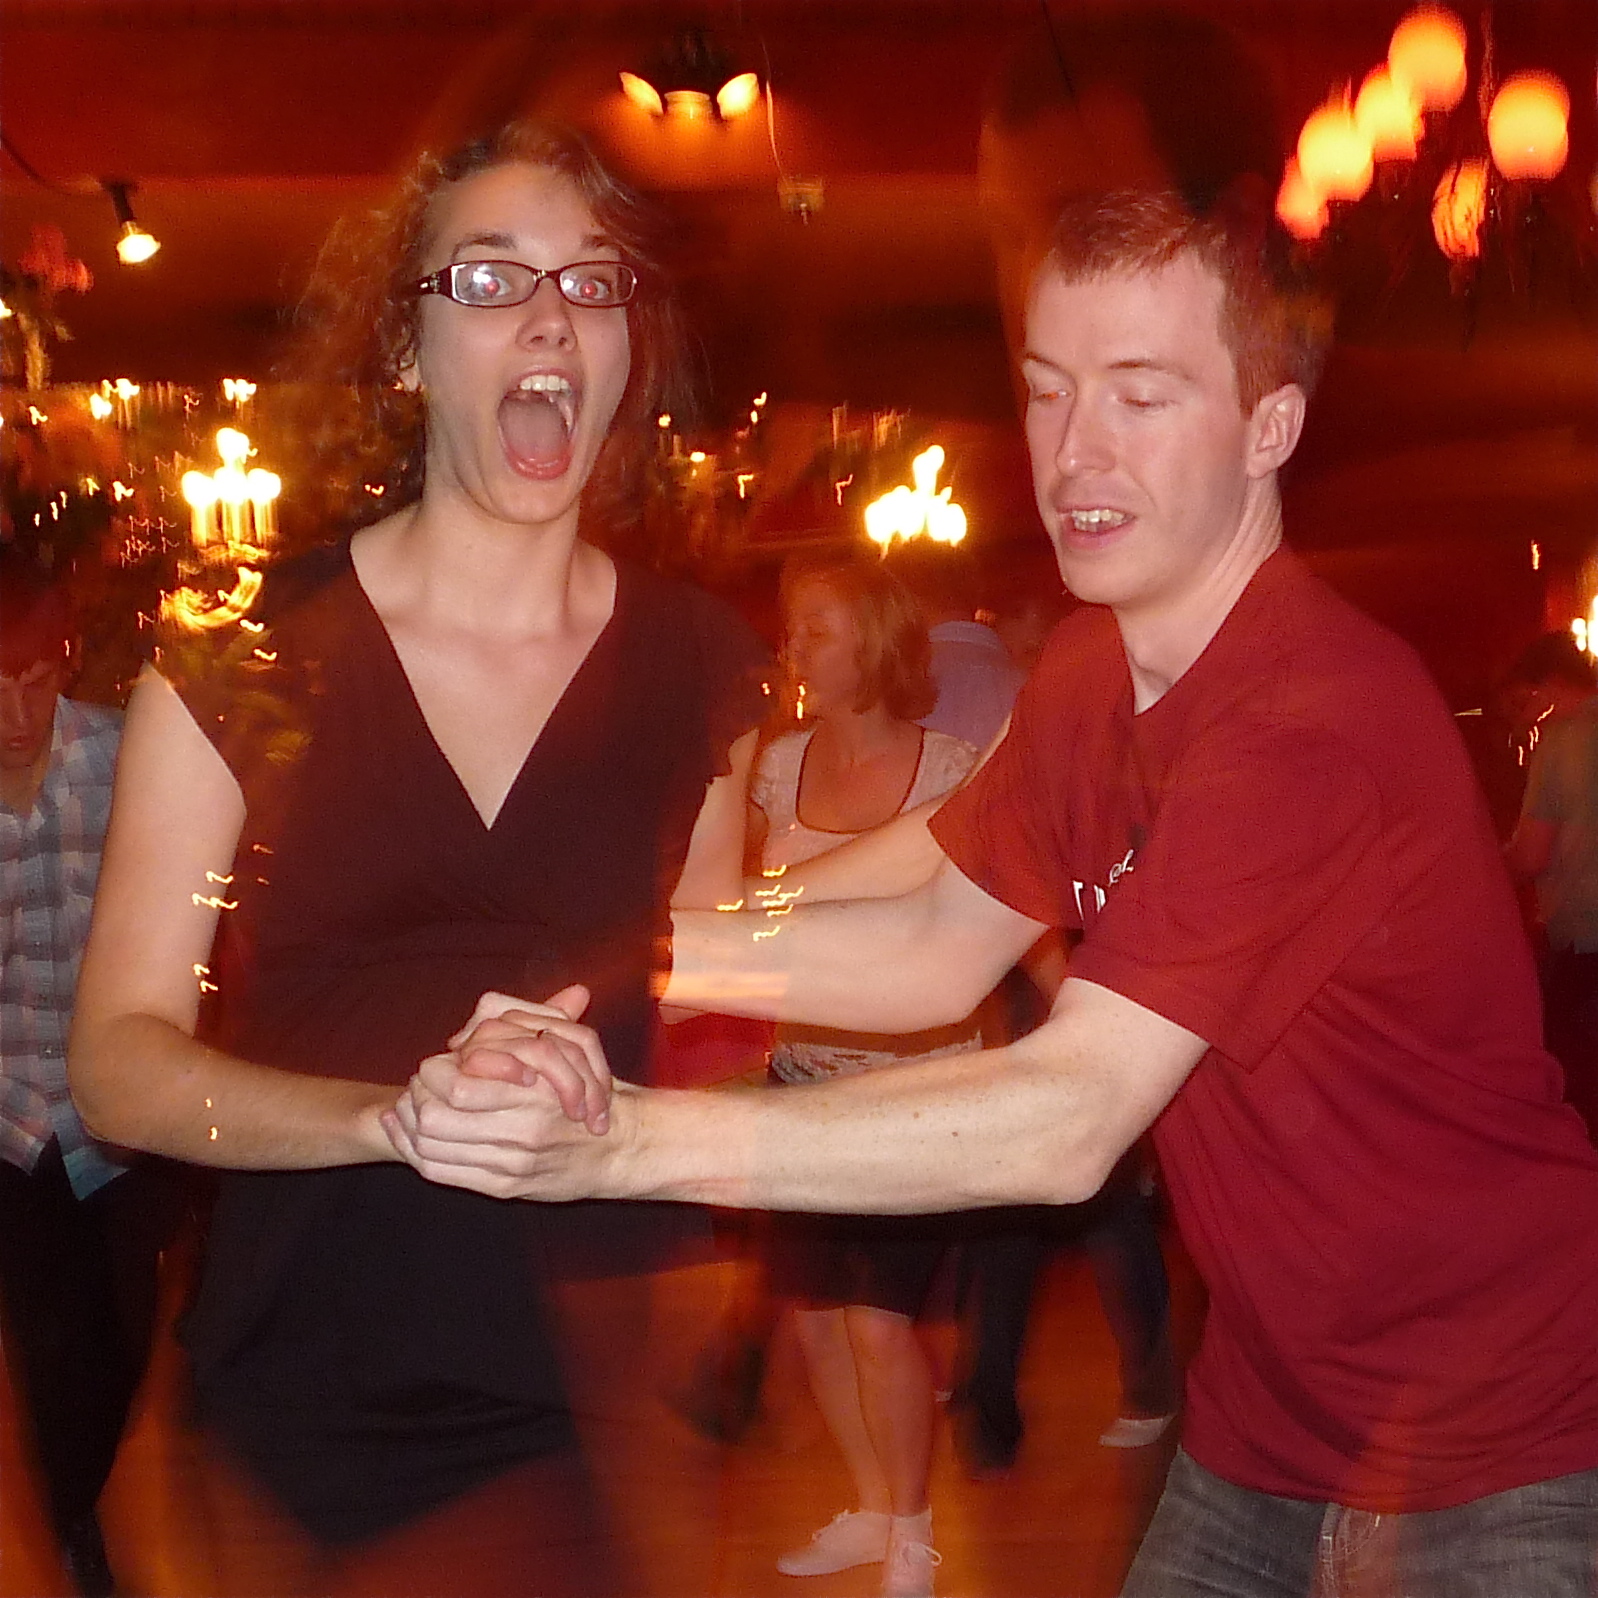 a man and woman are dancing at a party